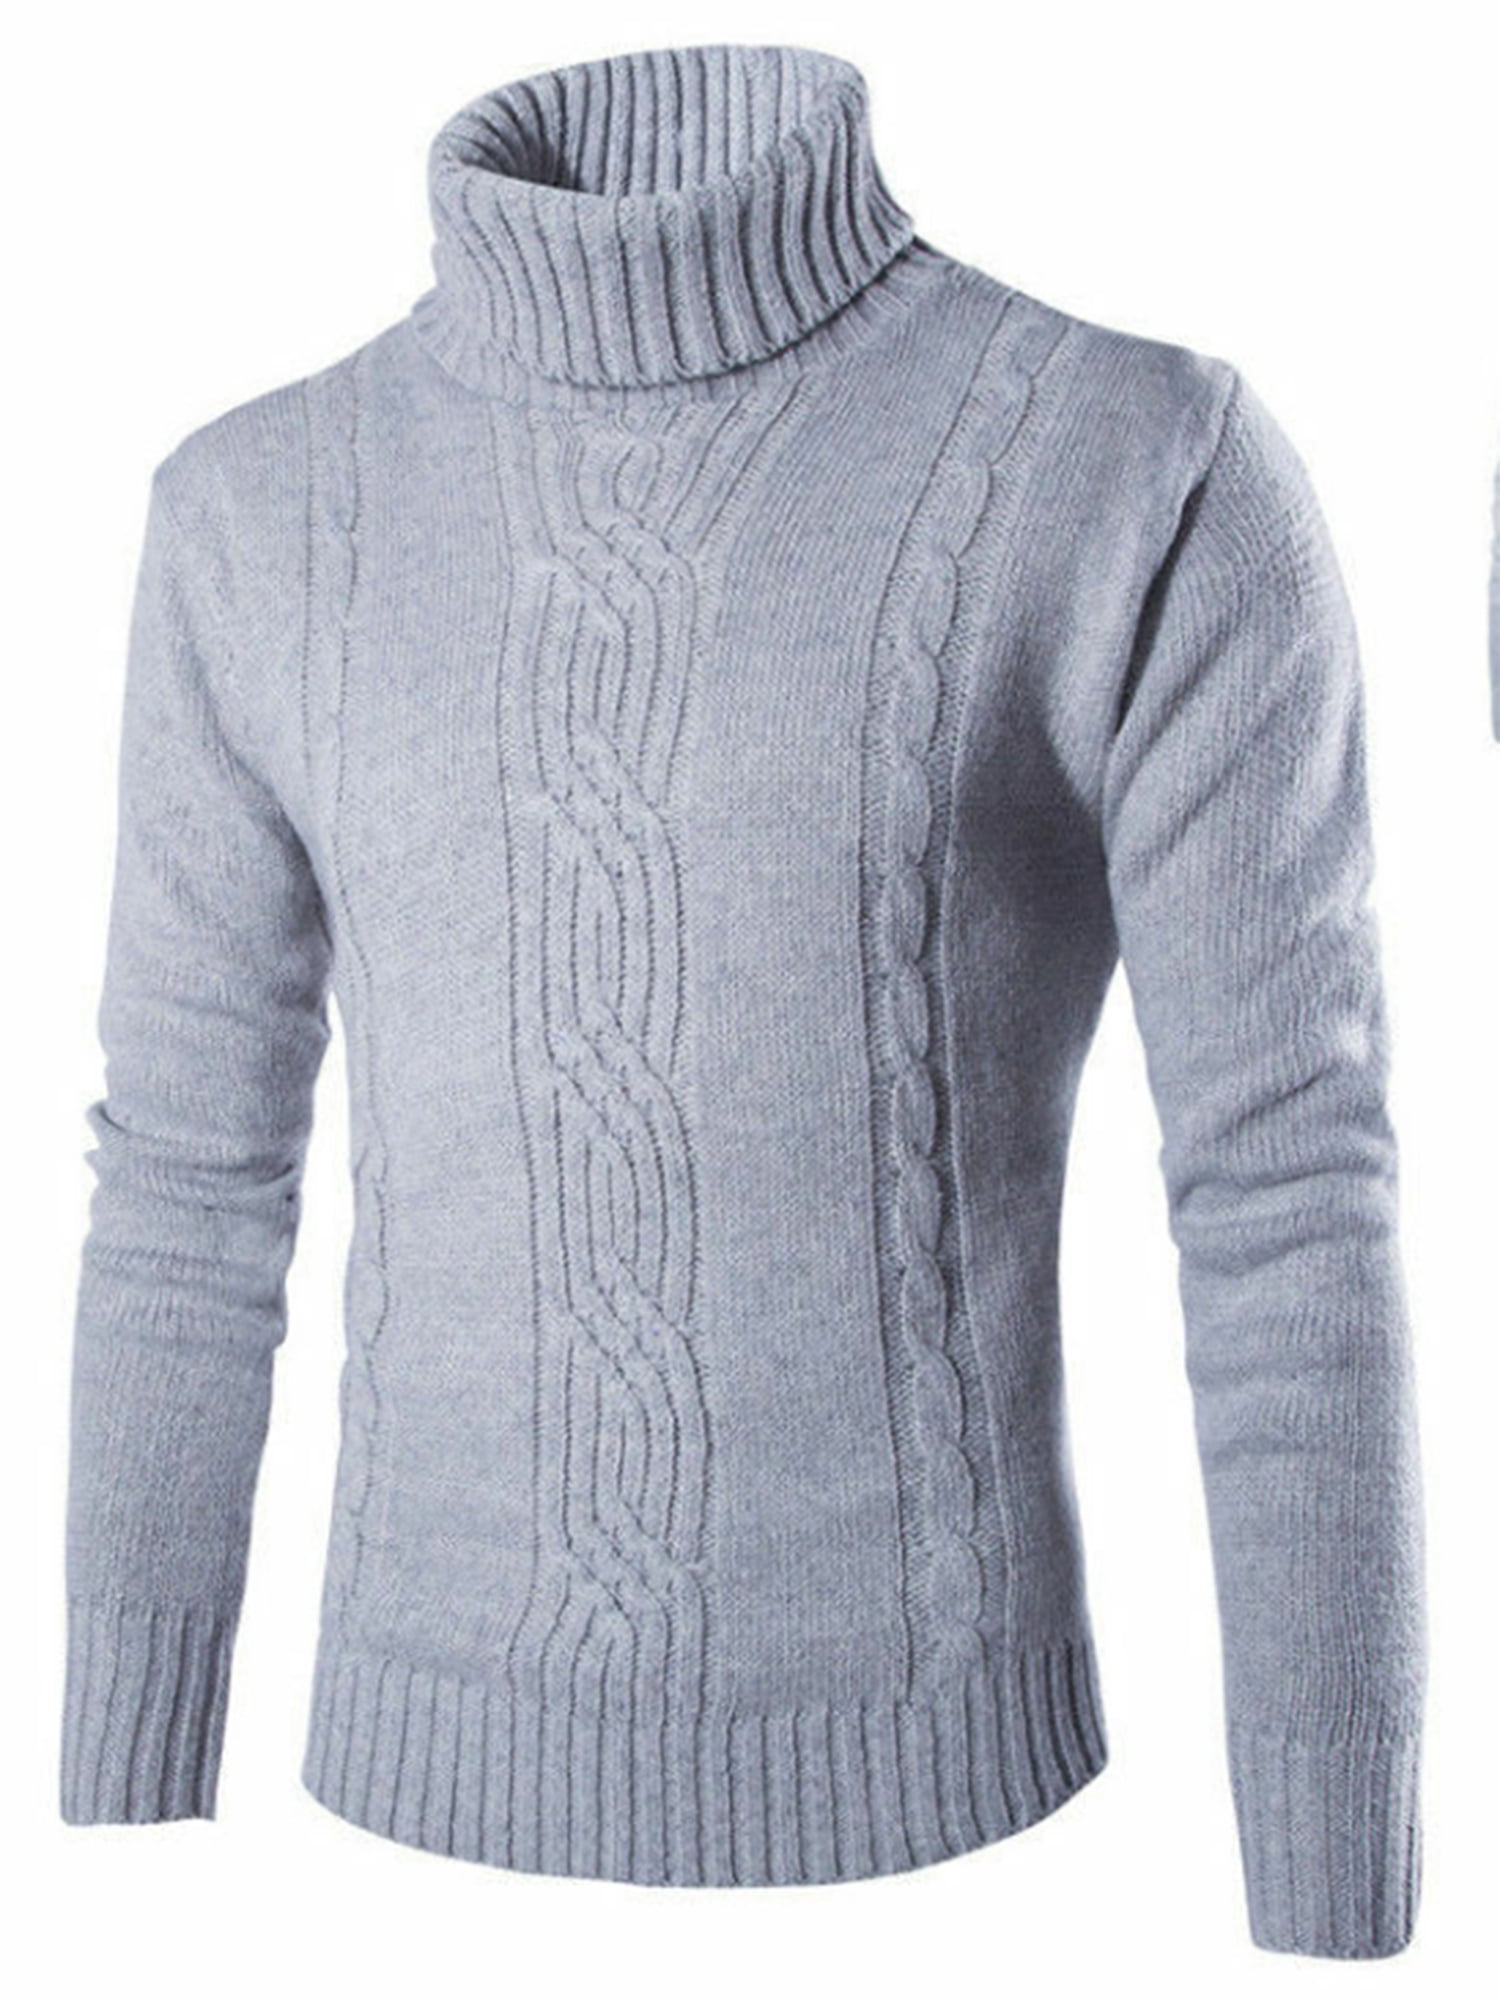 Frieed Mens Buttons Knitted Turtleneck Long Sleeve Fashion Pullover Sweater 